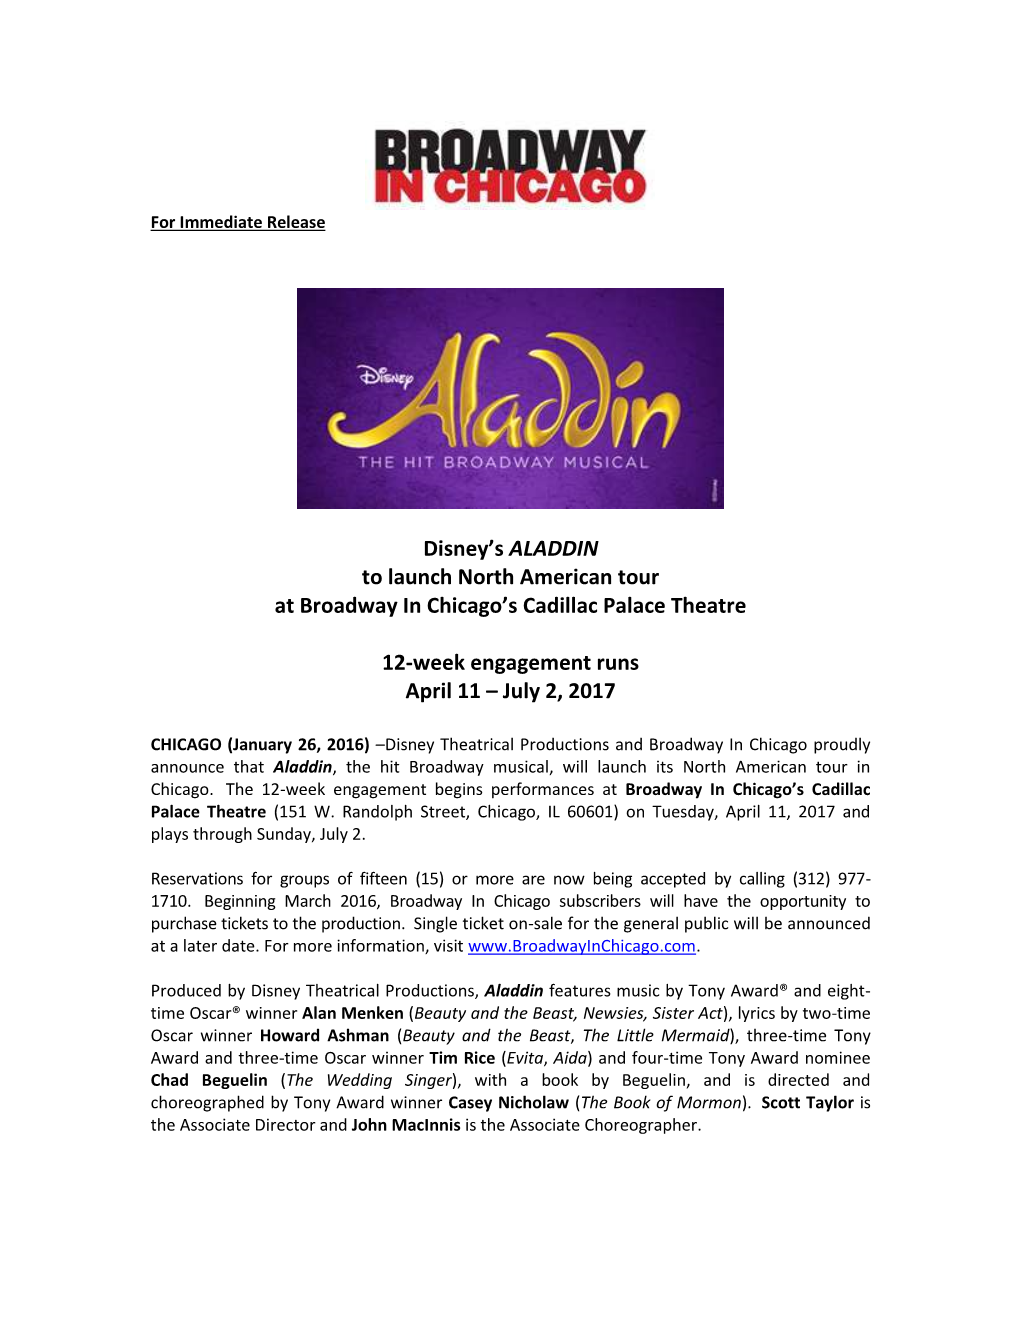 Disney's ALADDIN to Launch North American Tour at Broadway in Chicago's Cadillac Palace Theatre 12-Week Engagement Runs A